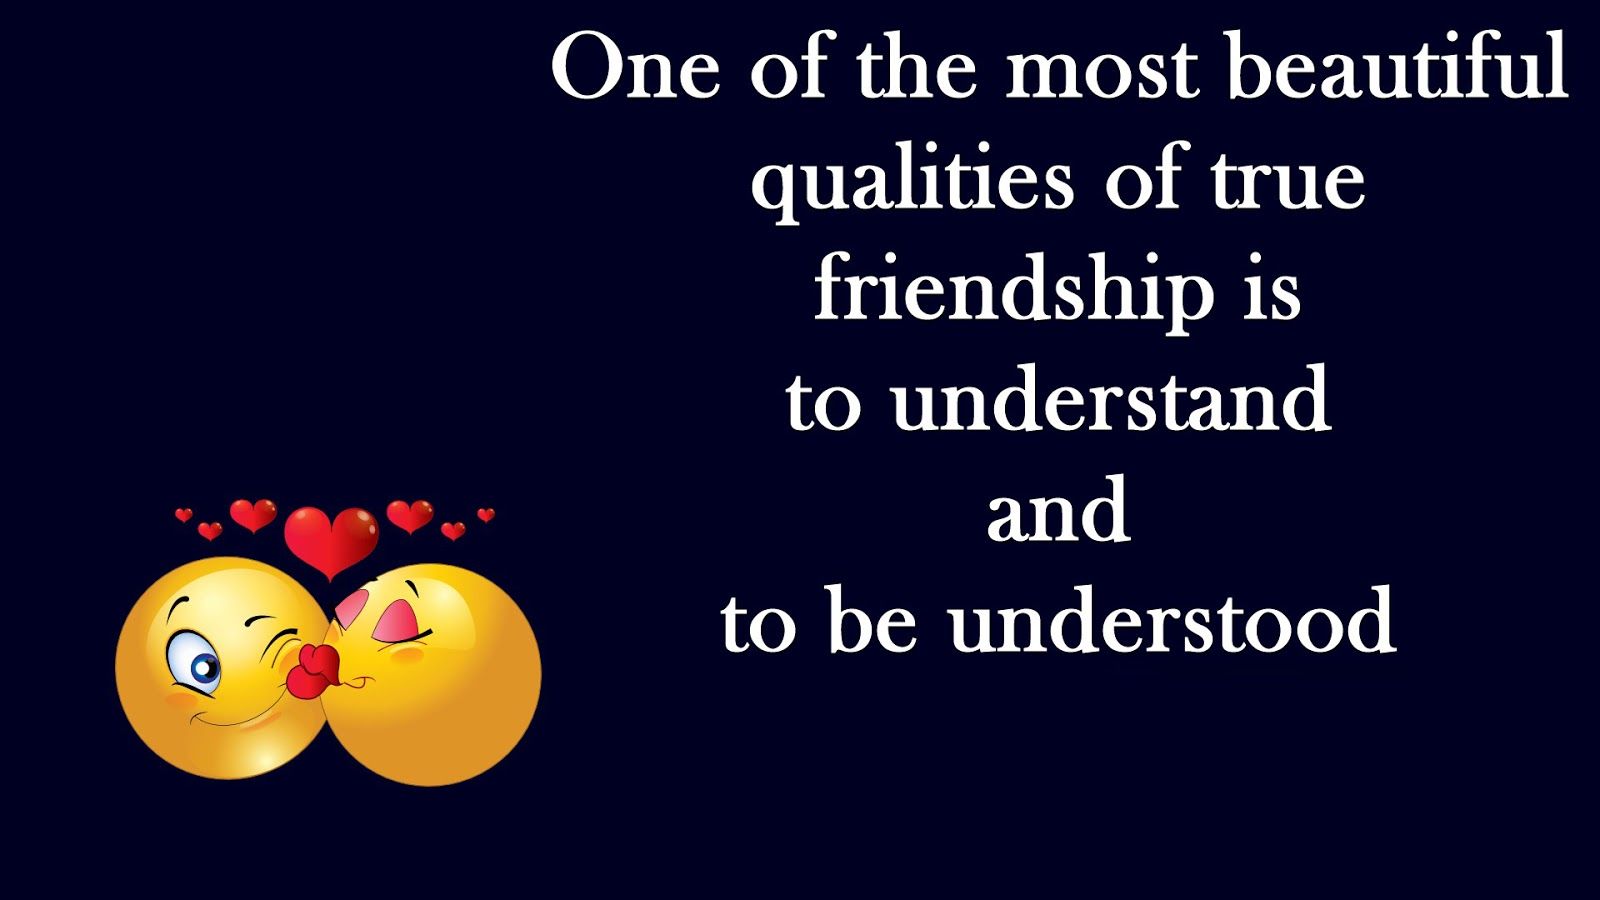 Happy Friendship Day Quotes Wallpaper. Friendship day quotes, Happy friendship day quotes, Friendship day wishes